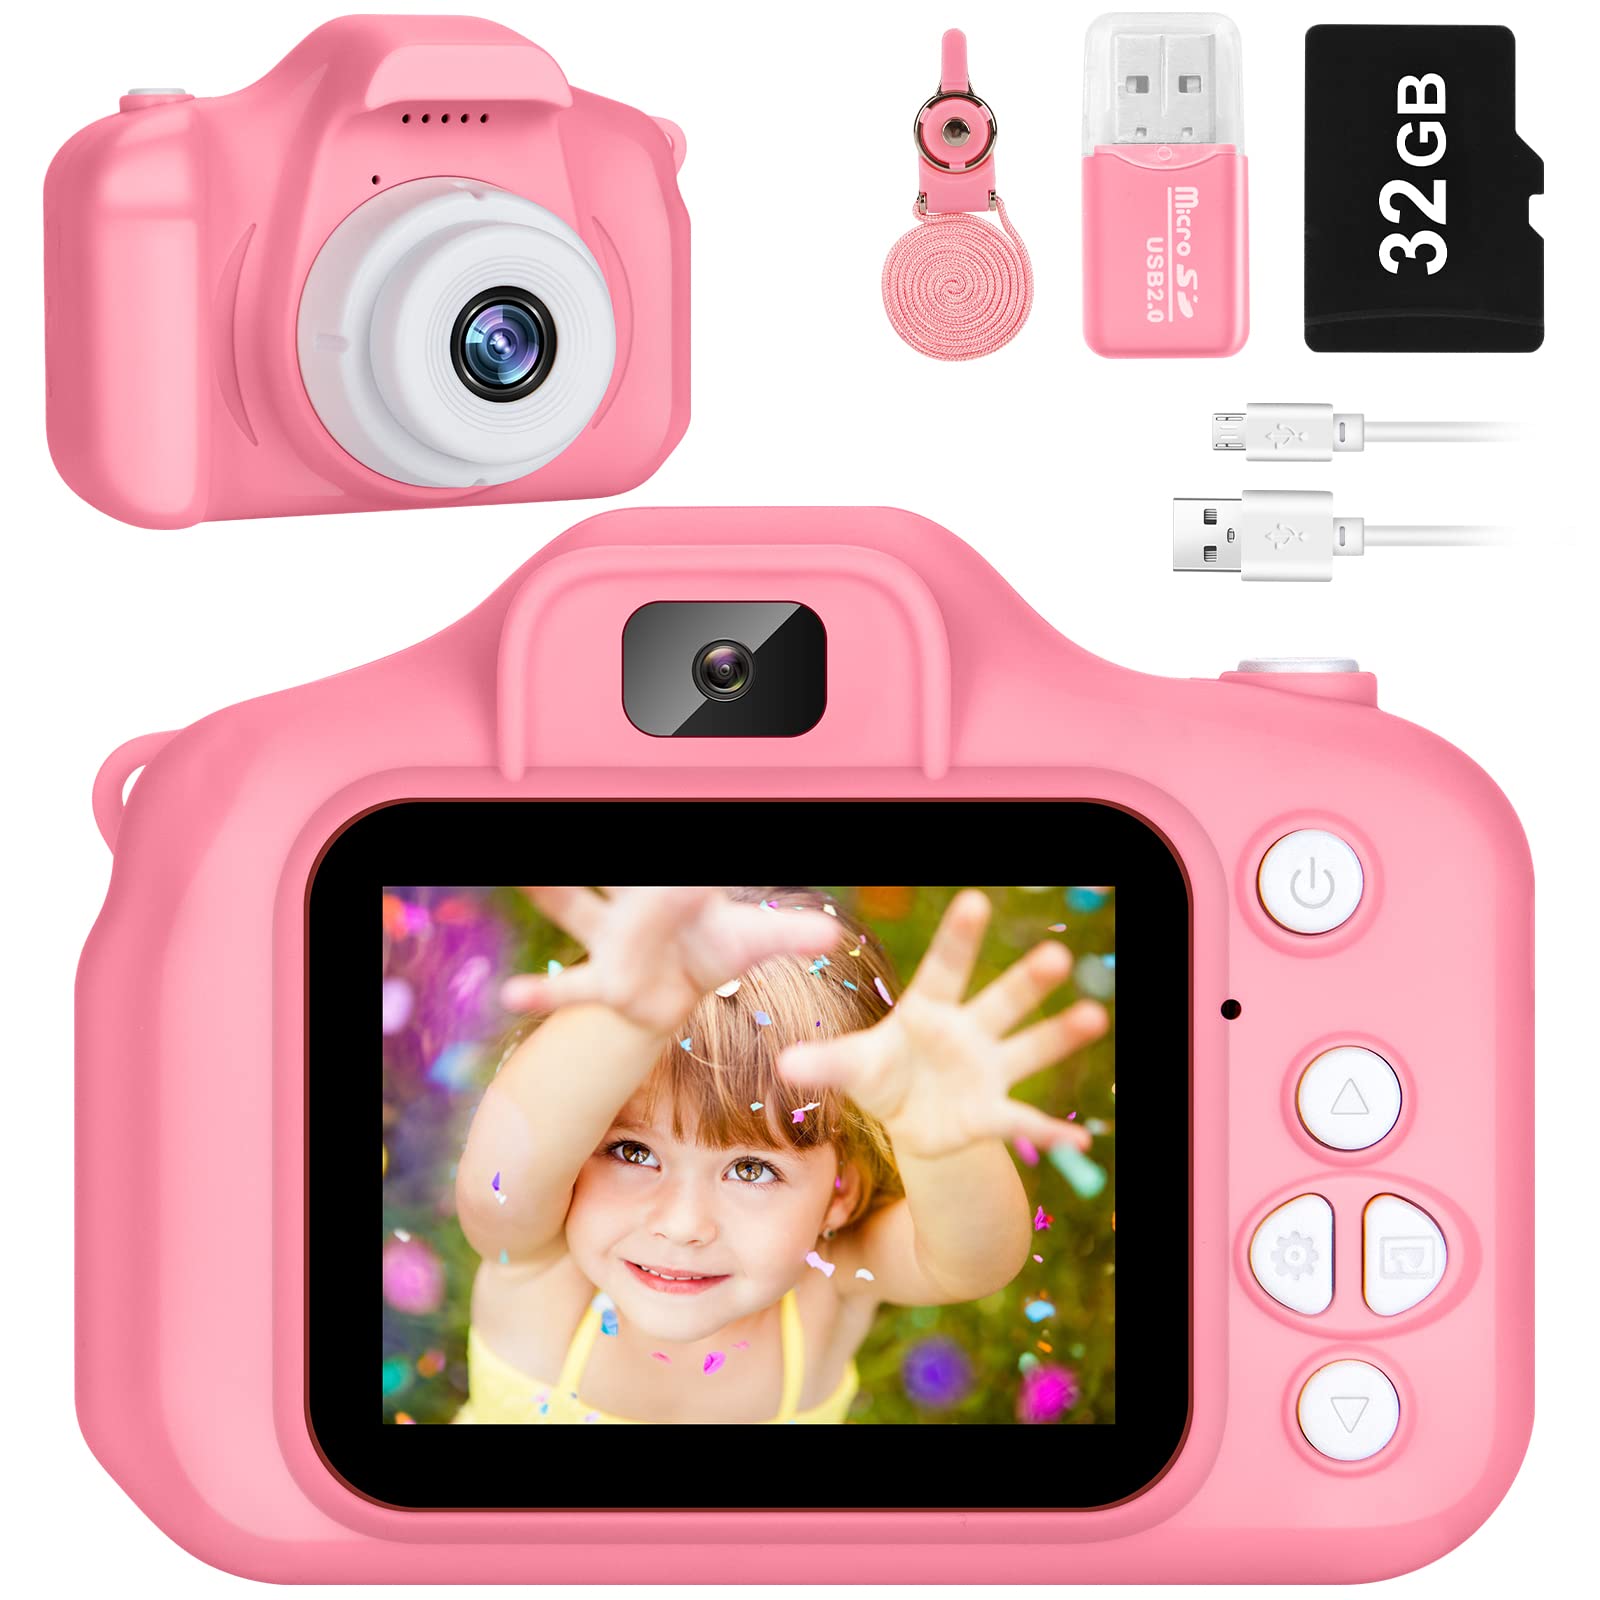 SINEAU Kids camera for Boys and girls, SINEAU Digital camera for Kids Toy gift, Toddler camera Birthday gift for Age 3 4 5 6 7 8 9 10 w